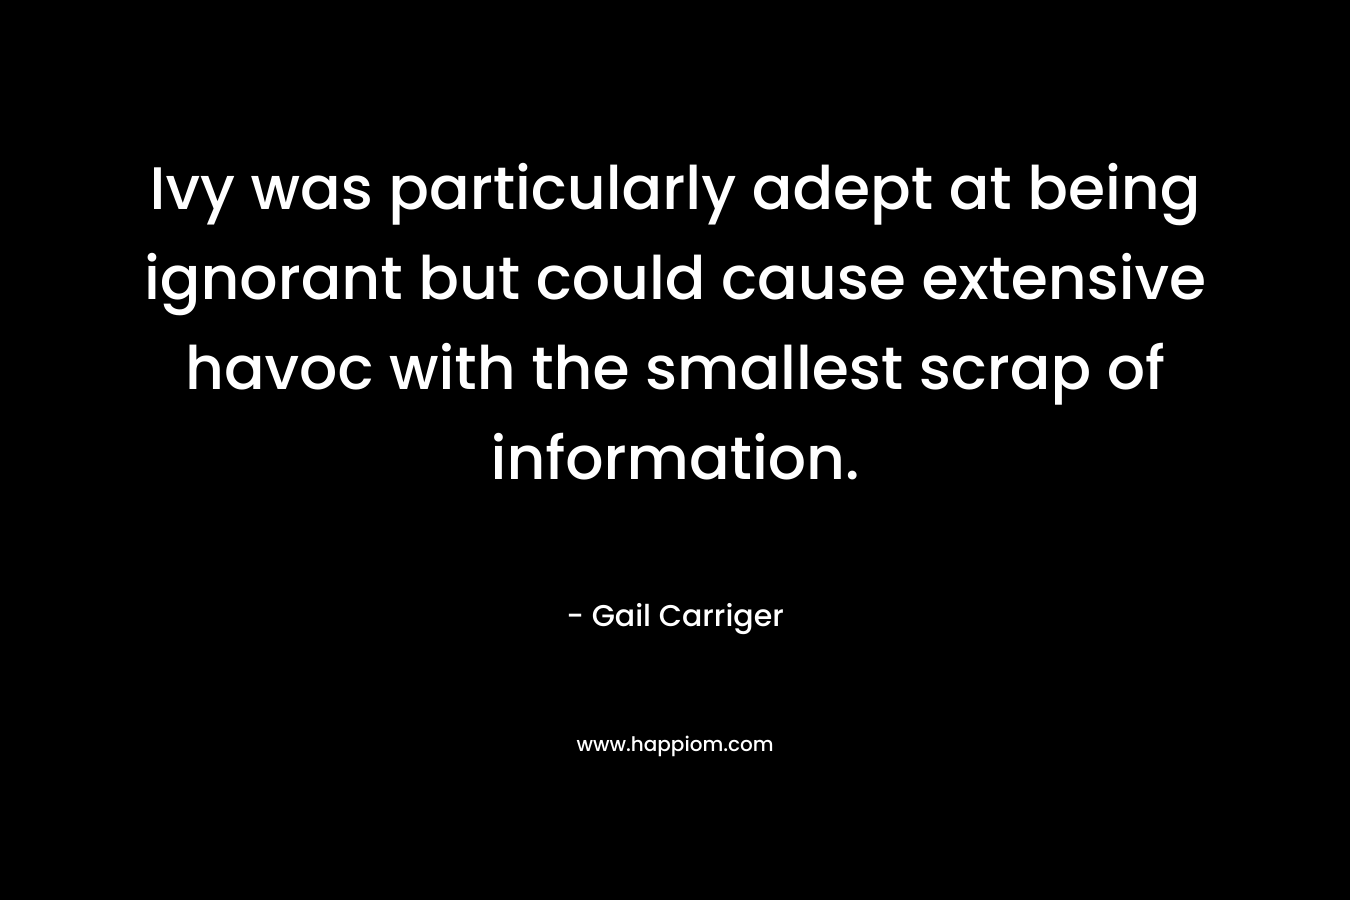 Ivy was particularly adept at being ignorant but could cause extensive havoc with the smallest scrap of information. – Gail Carriger